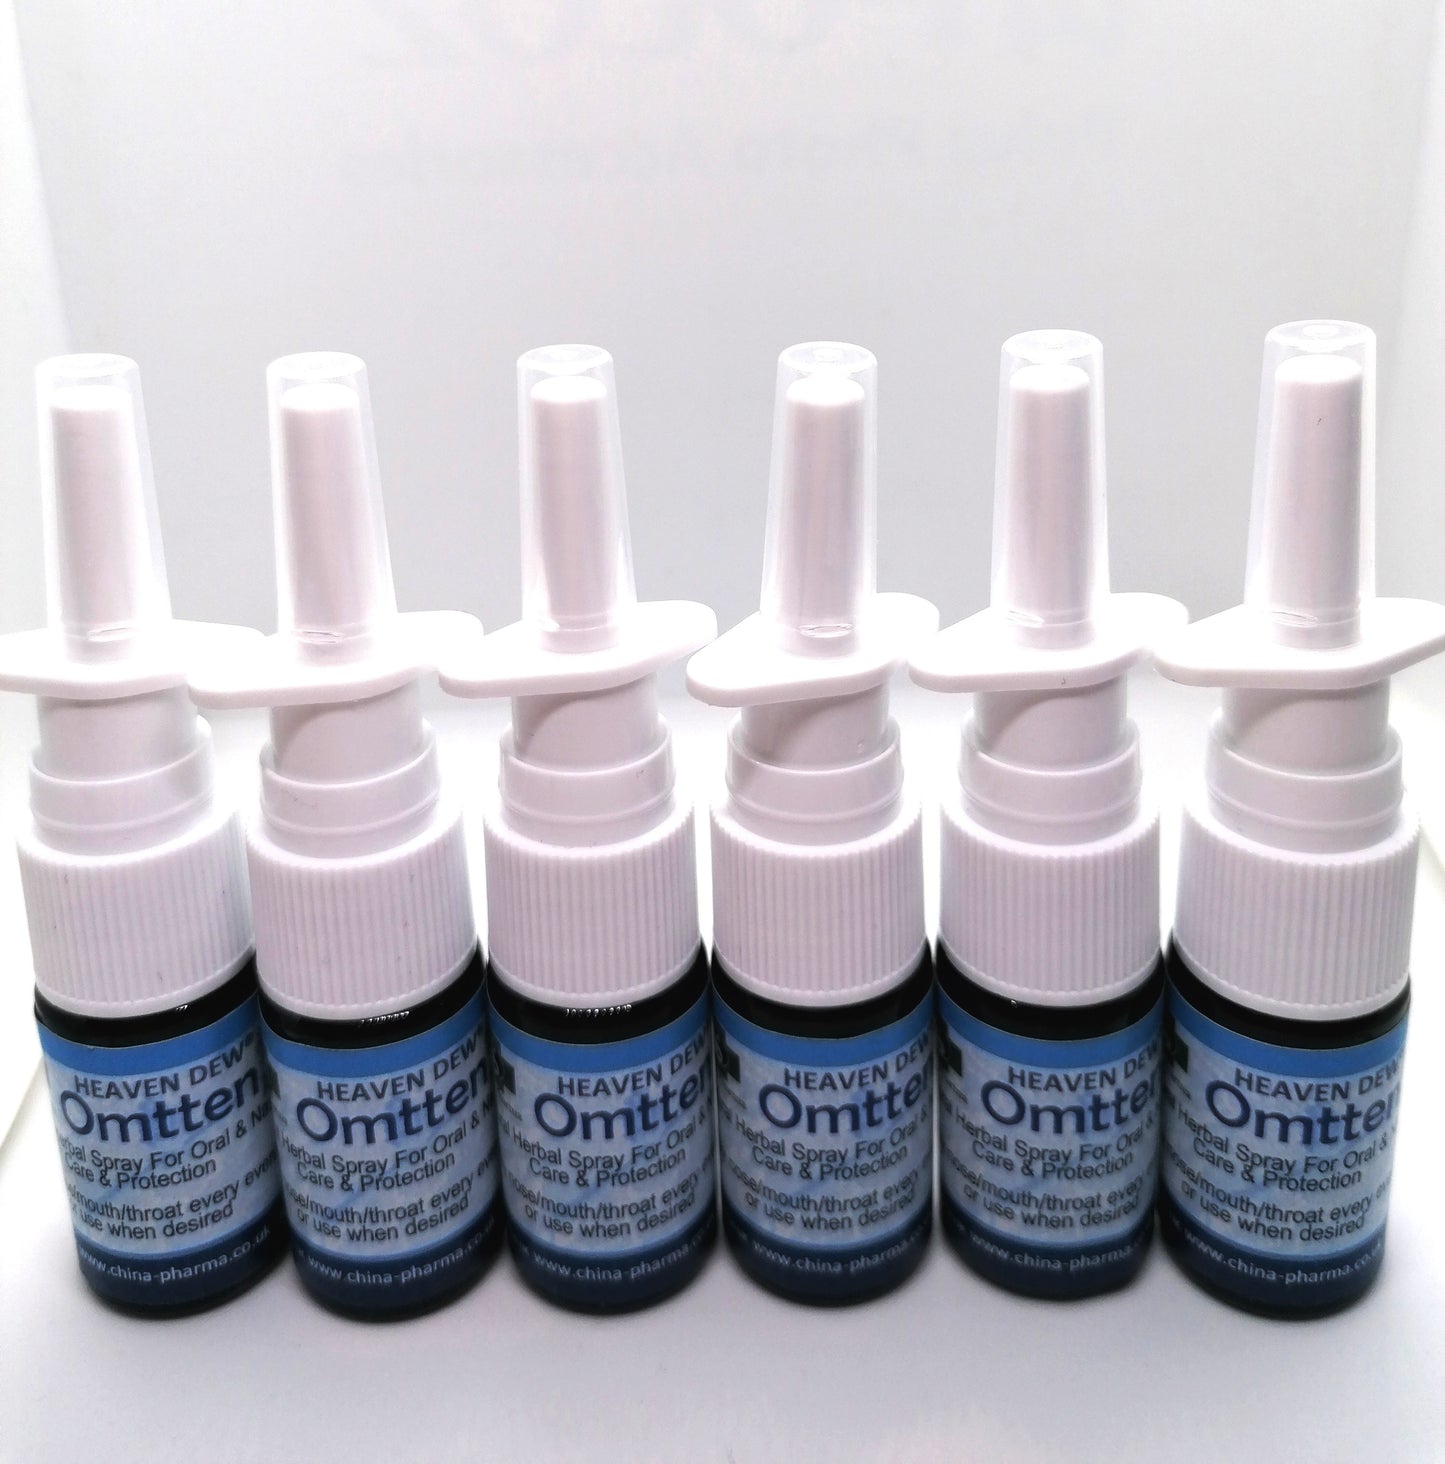 Bad Breath Halitosis Treatment Natural Herbal Spray 6 Pack  60 Day Supply Oral Mouth Spray 